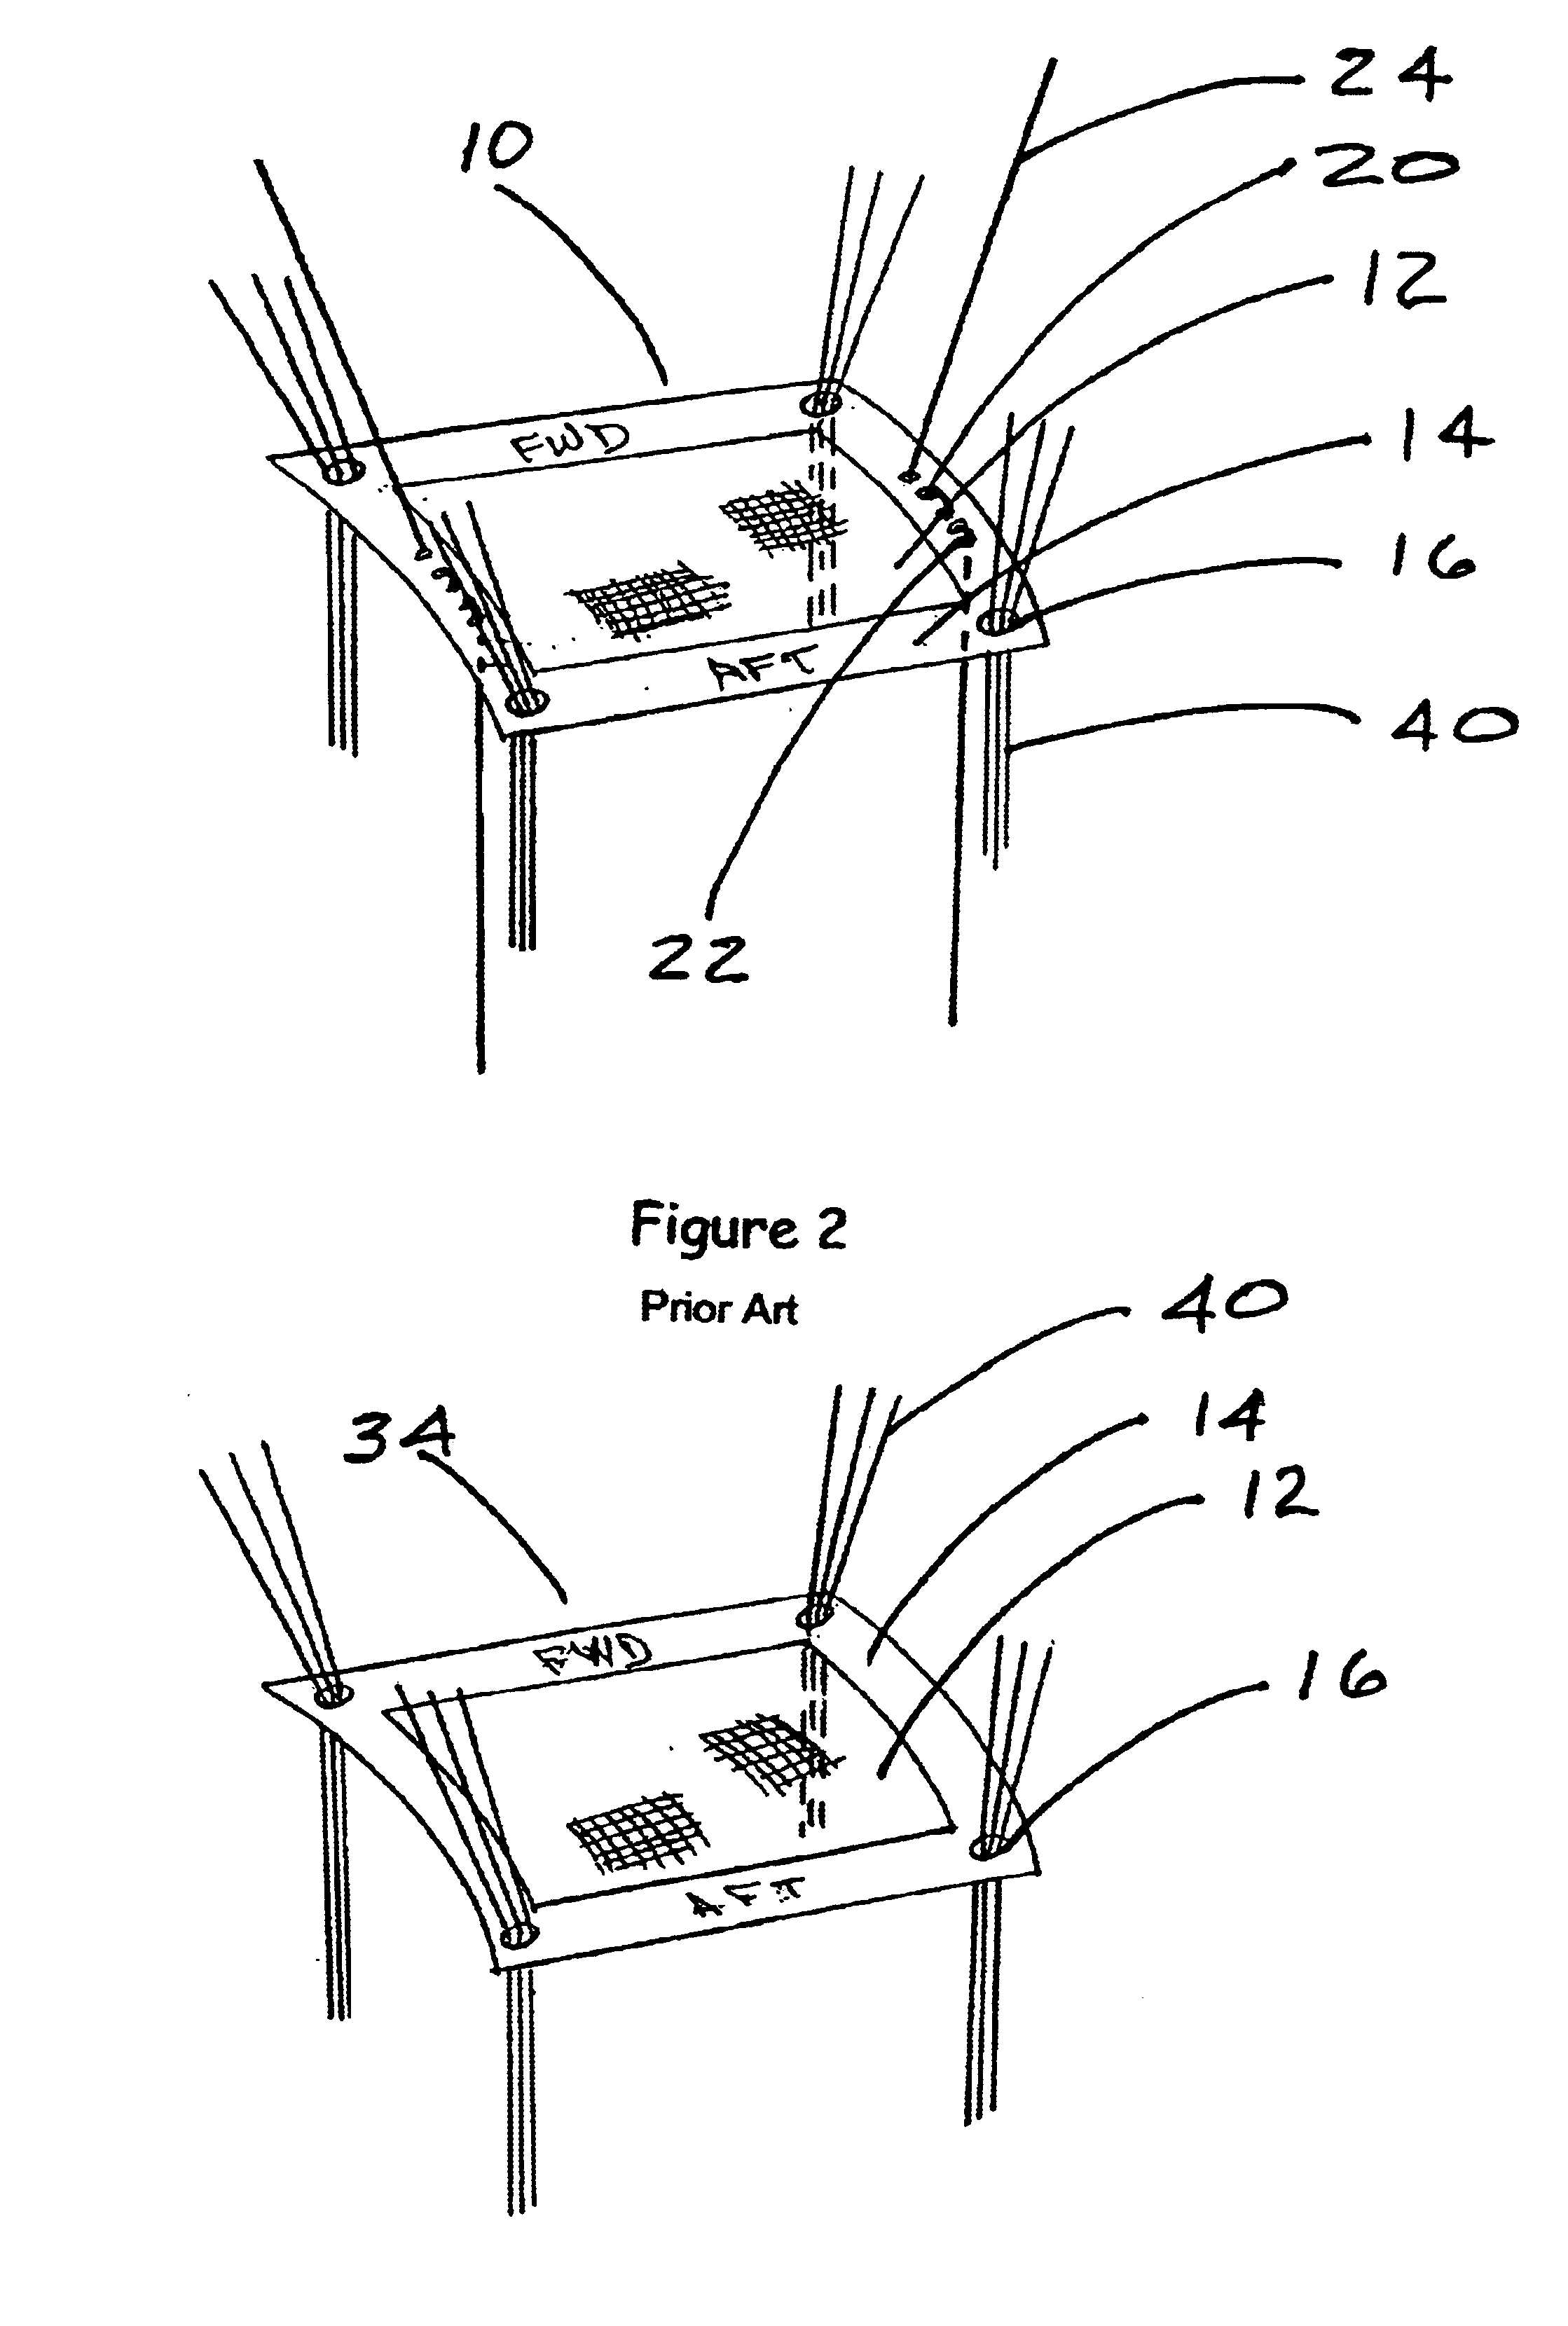 Parachute slider reefing with friction induced retardation